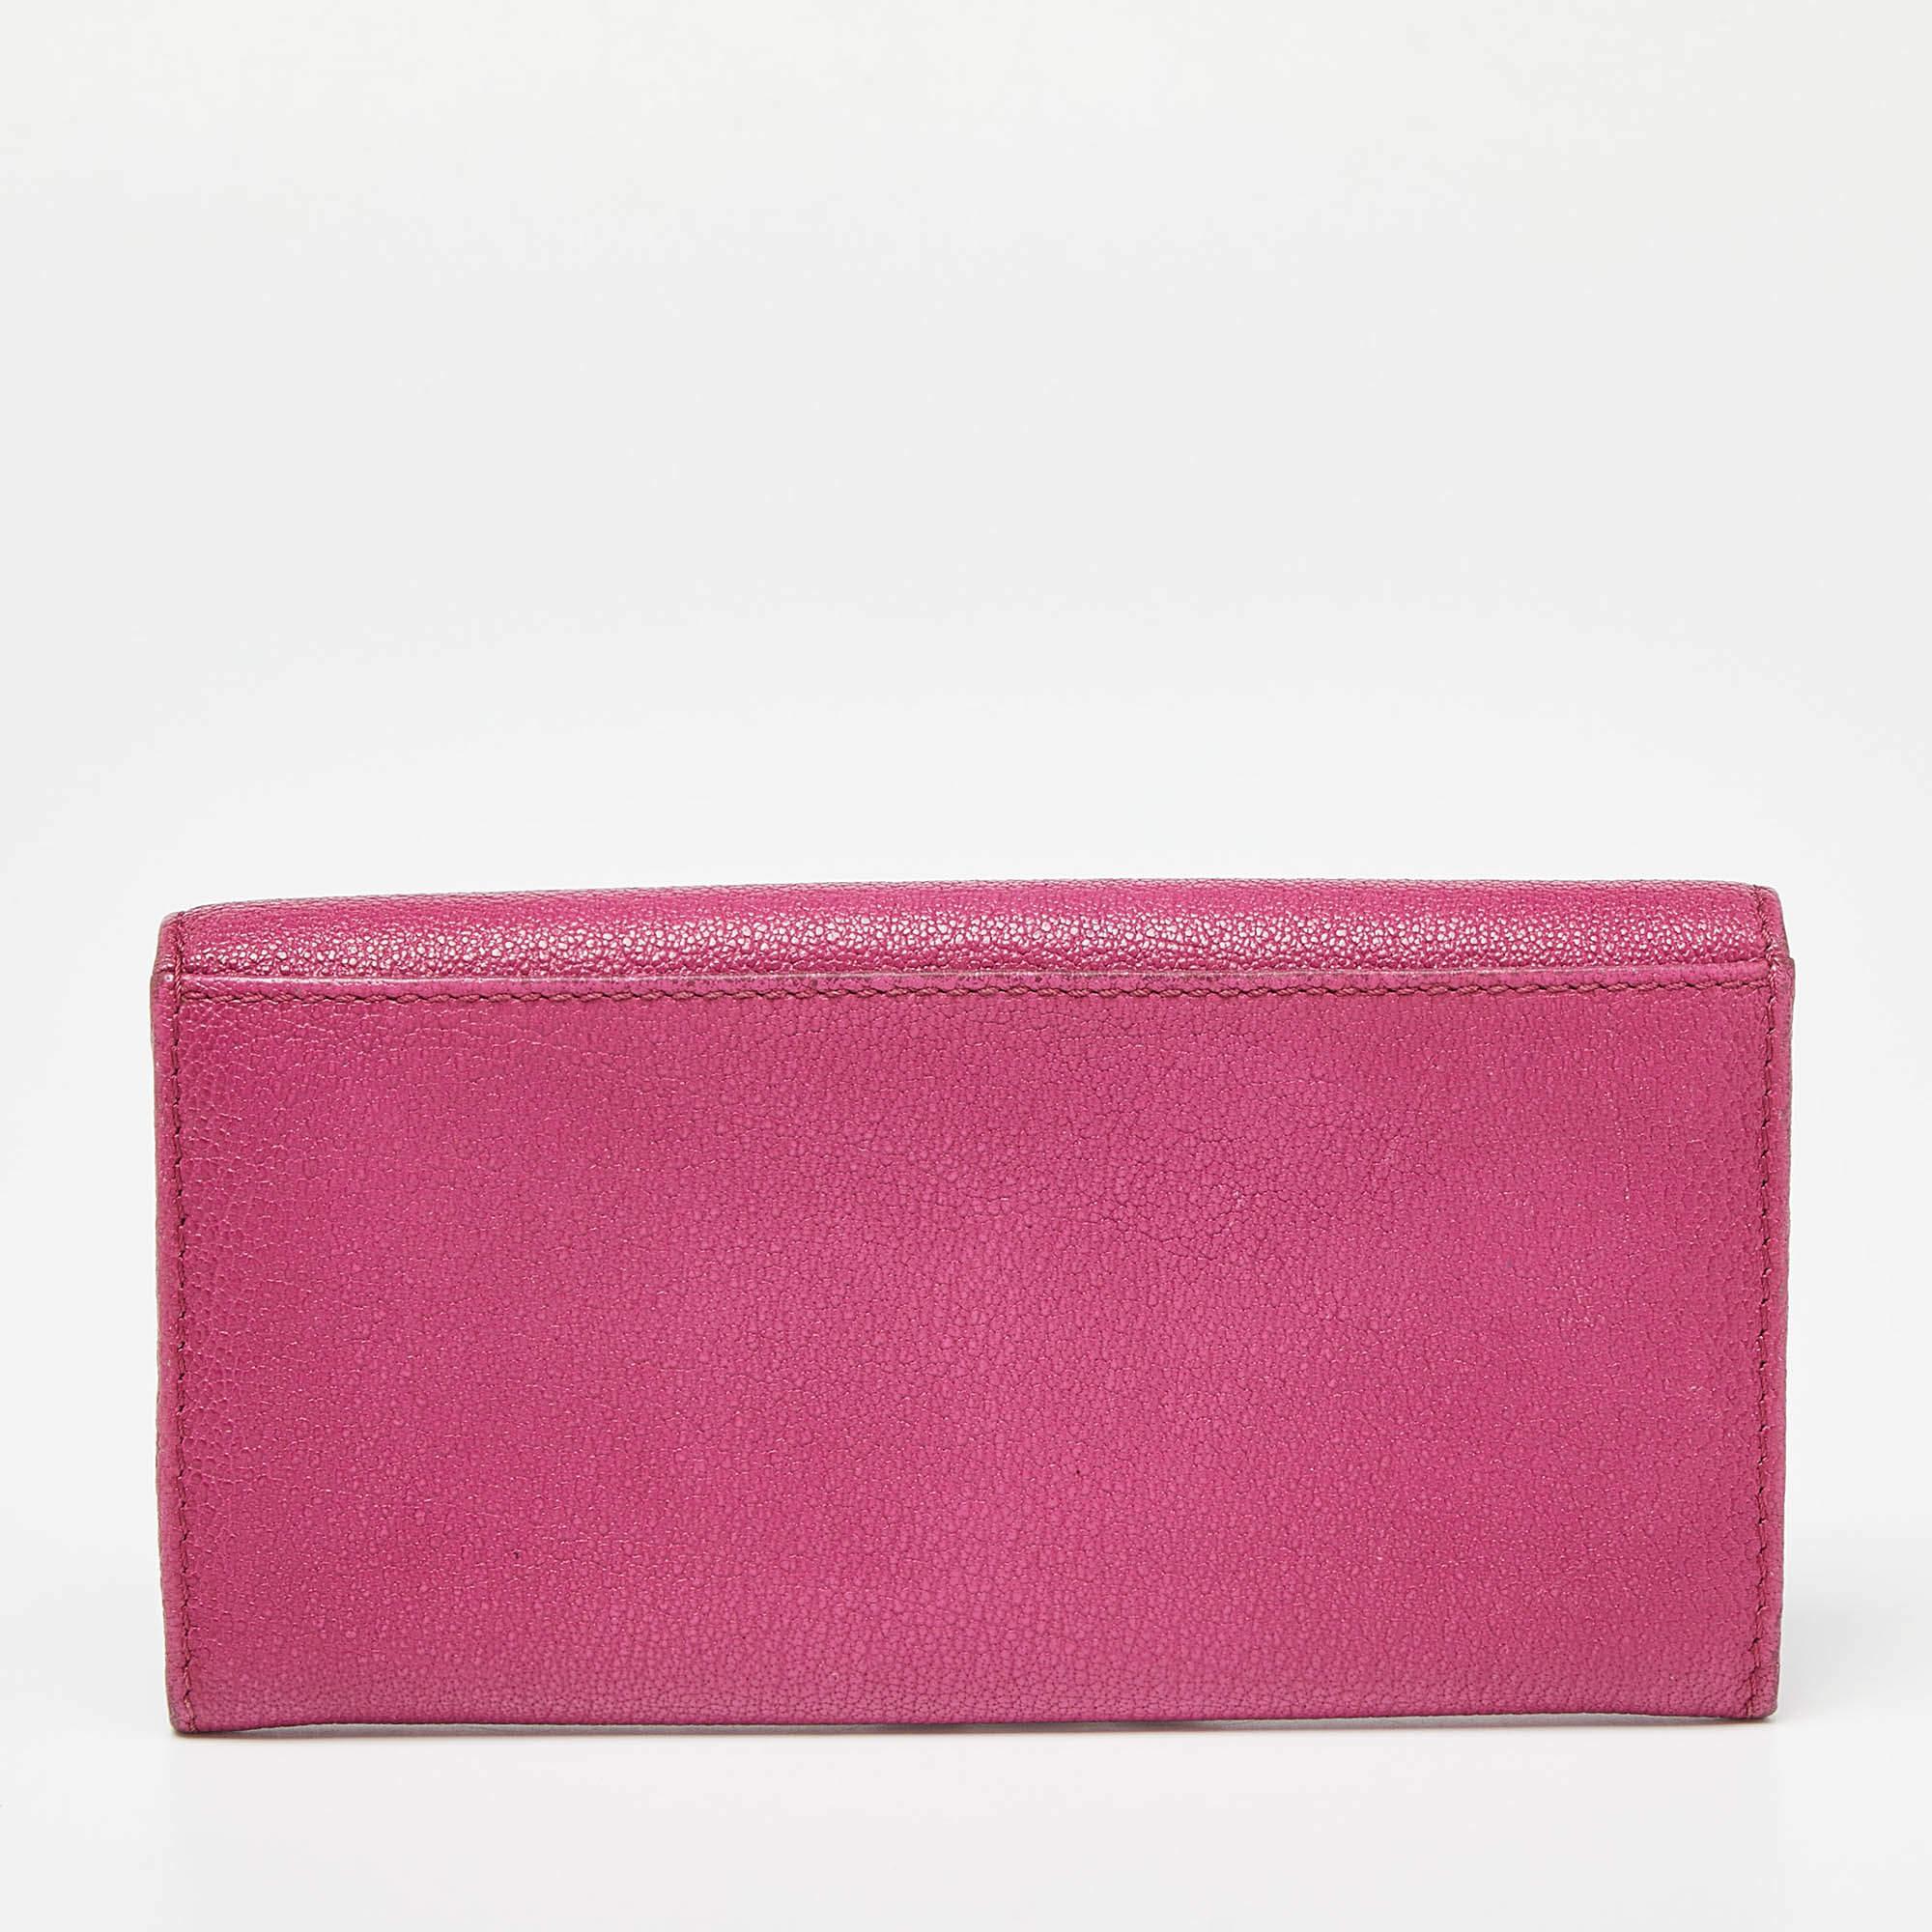 Burberry Pink Leather Flap Continental Wallet For Sale 5